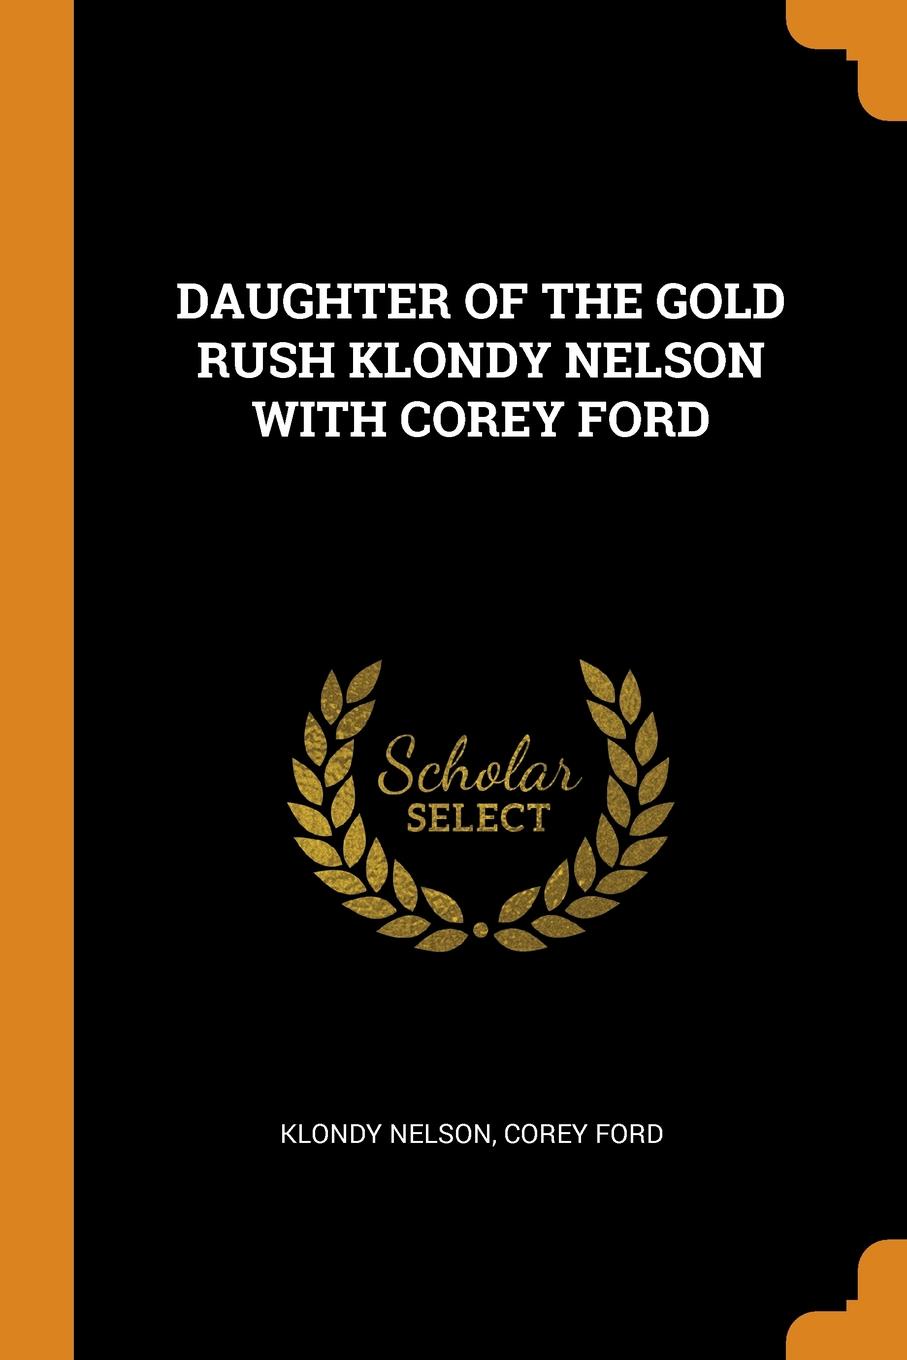 DAUGHTER OF THE GOLD RUSH KLONDY NELSON WITH COREY FORD